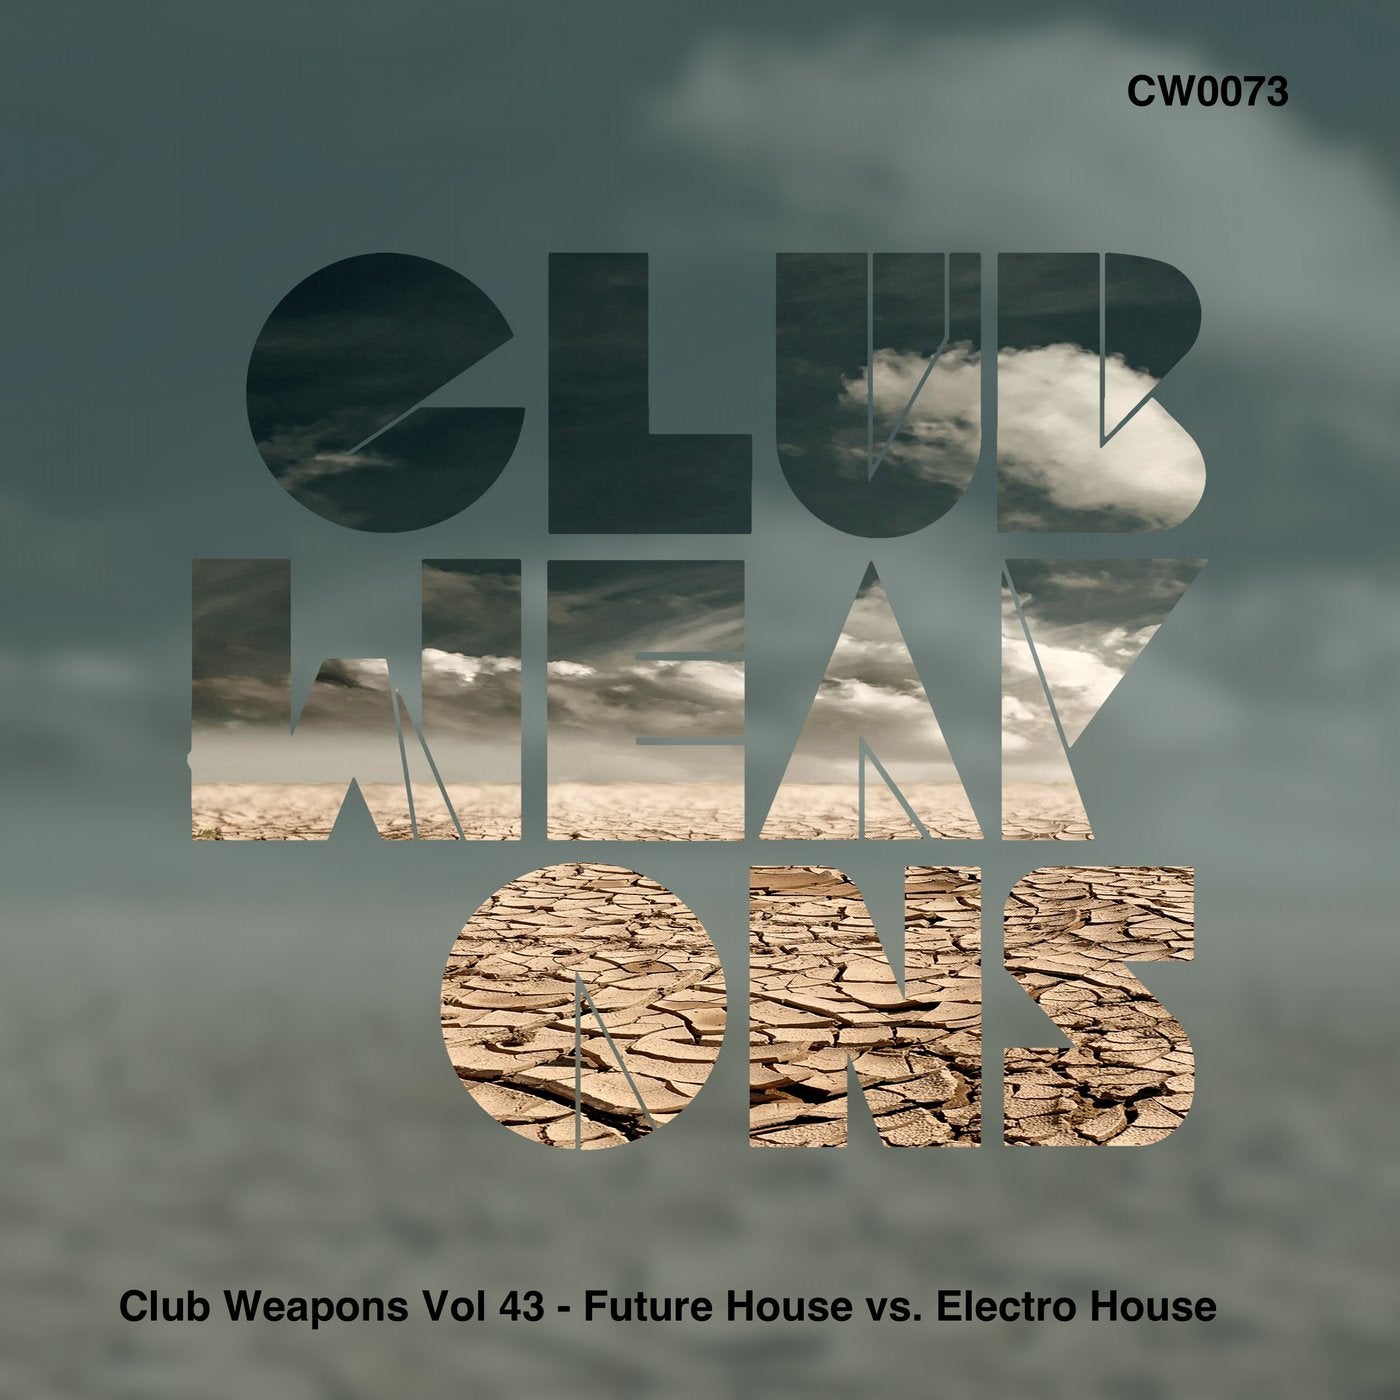 Club Weapons Vol.43 - Future House vs. Electro House